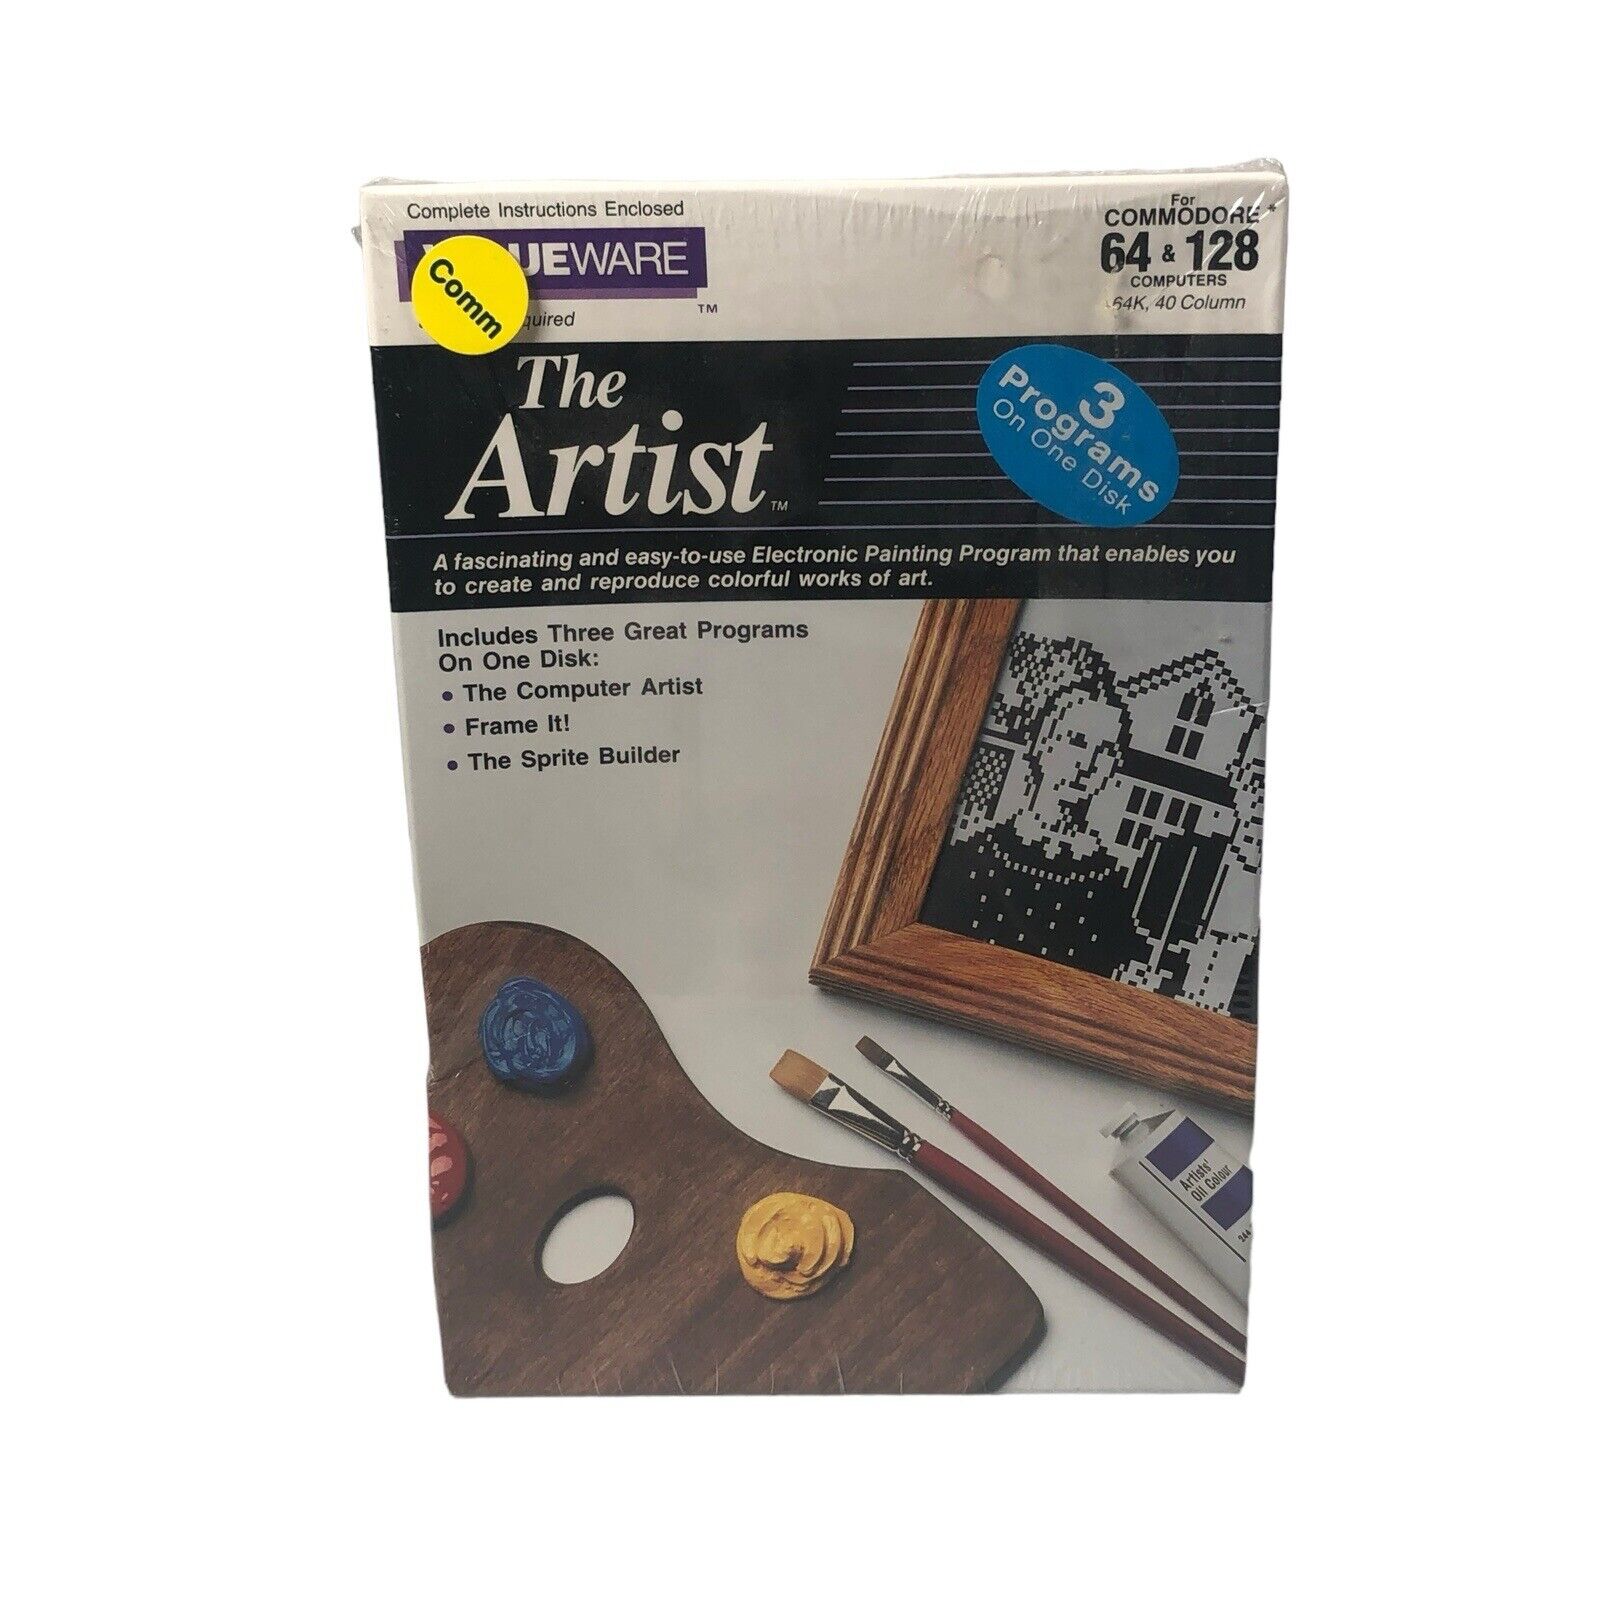 Commodore The Artist Software By Valueware 3-in-1 w/ Frame It Sprite Builder 